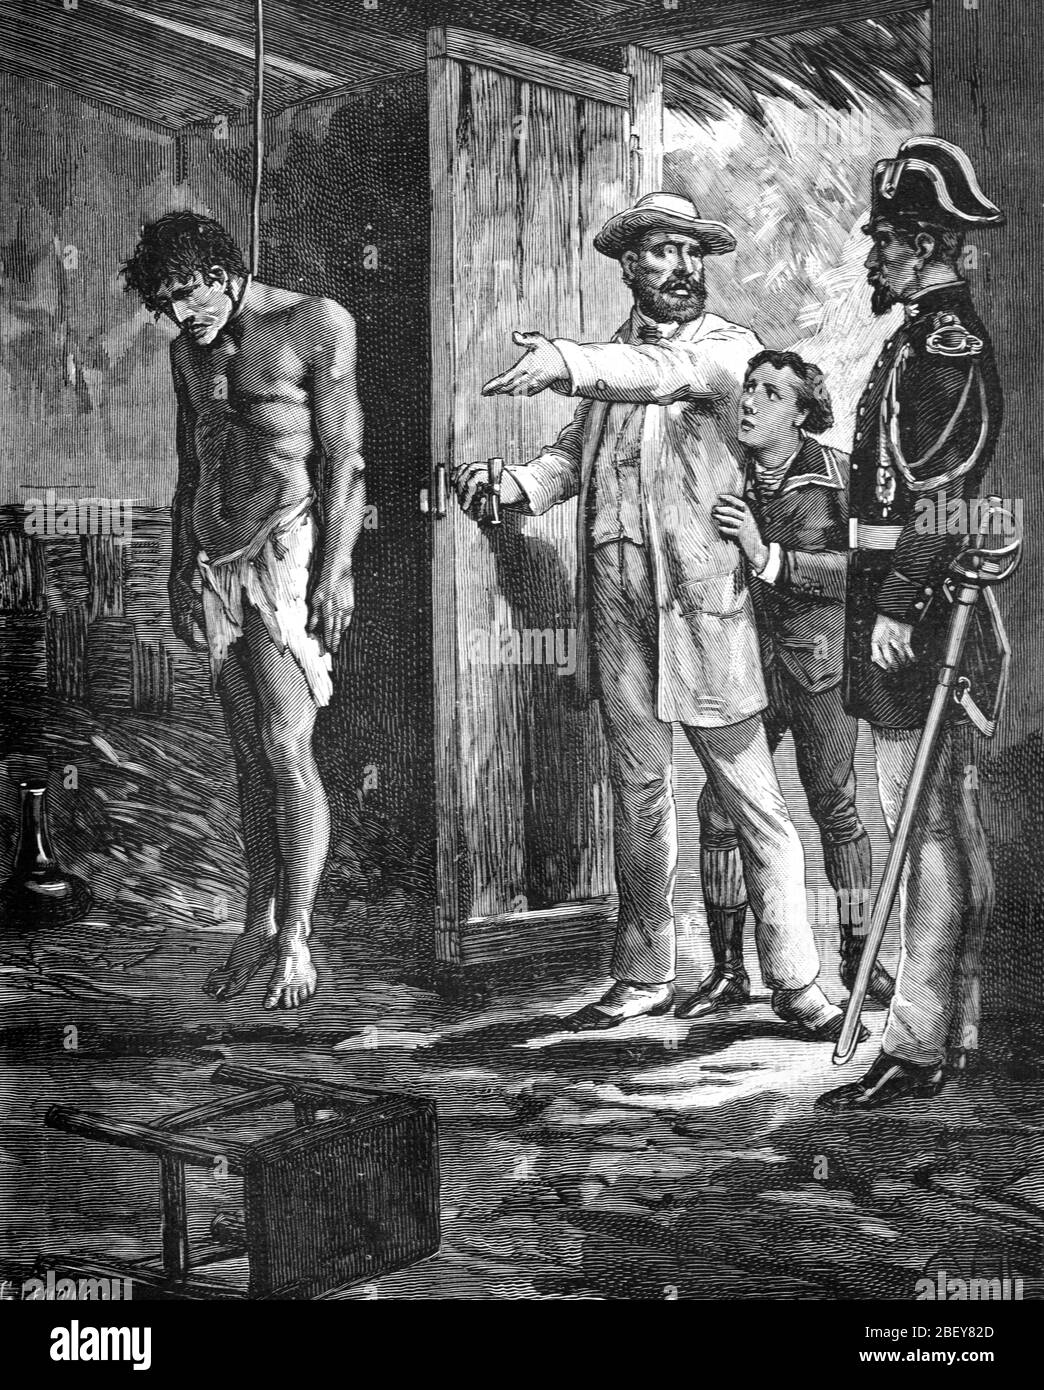 Indian Immigrant or Indentured Labourer Suicide by Hanging in La reunion or the French Colonies. Vintage or Old Illustration or Engraving 1888 Stock Photo